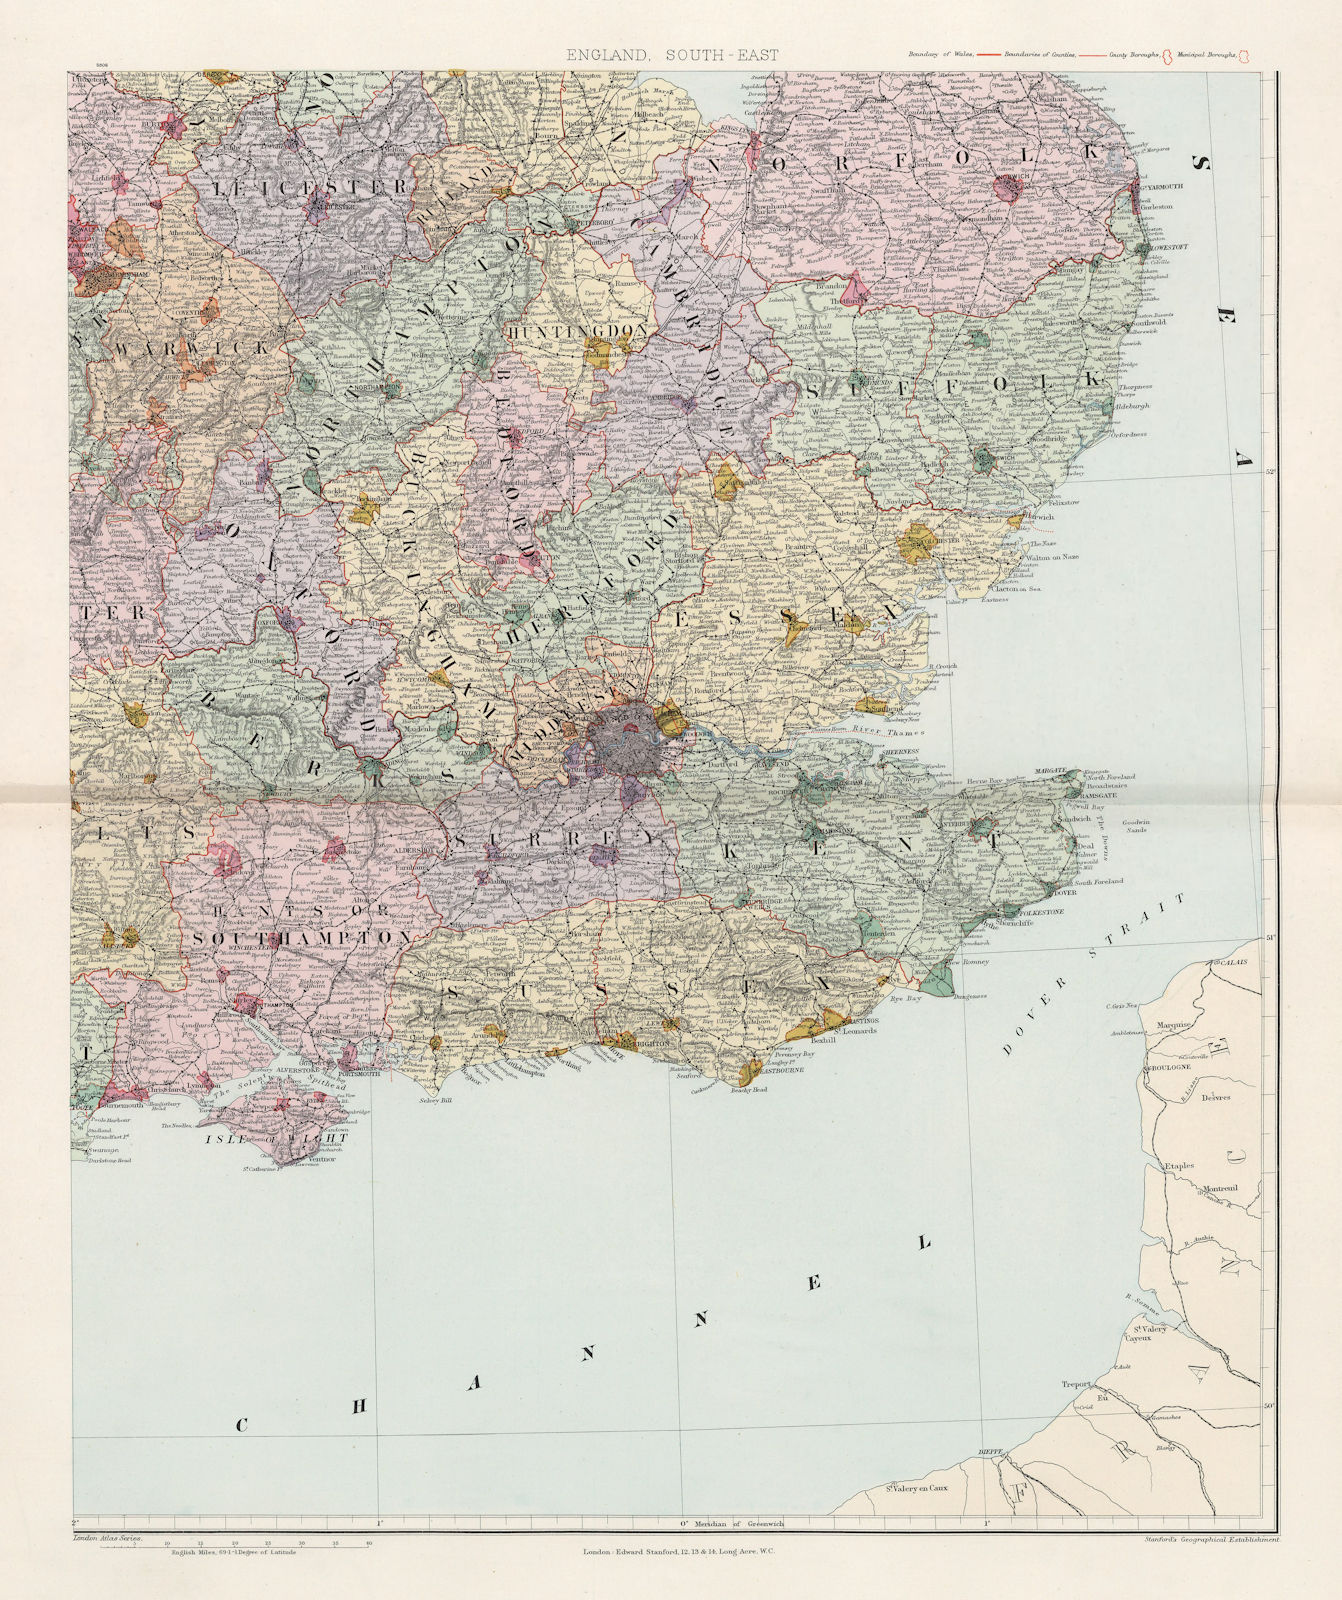 Associate Product South east England. Counties & boroughs. Large 62x50cm. STANFORD 1904 old map